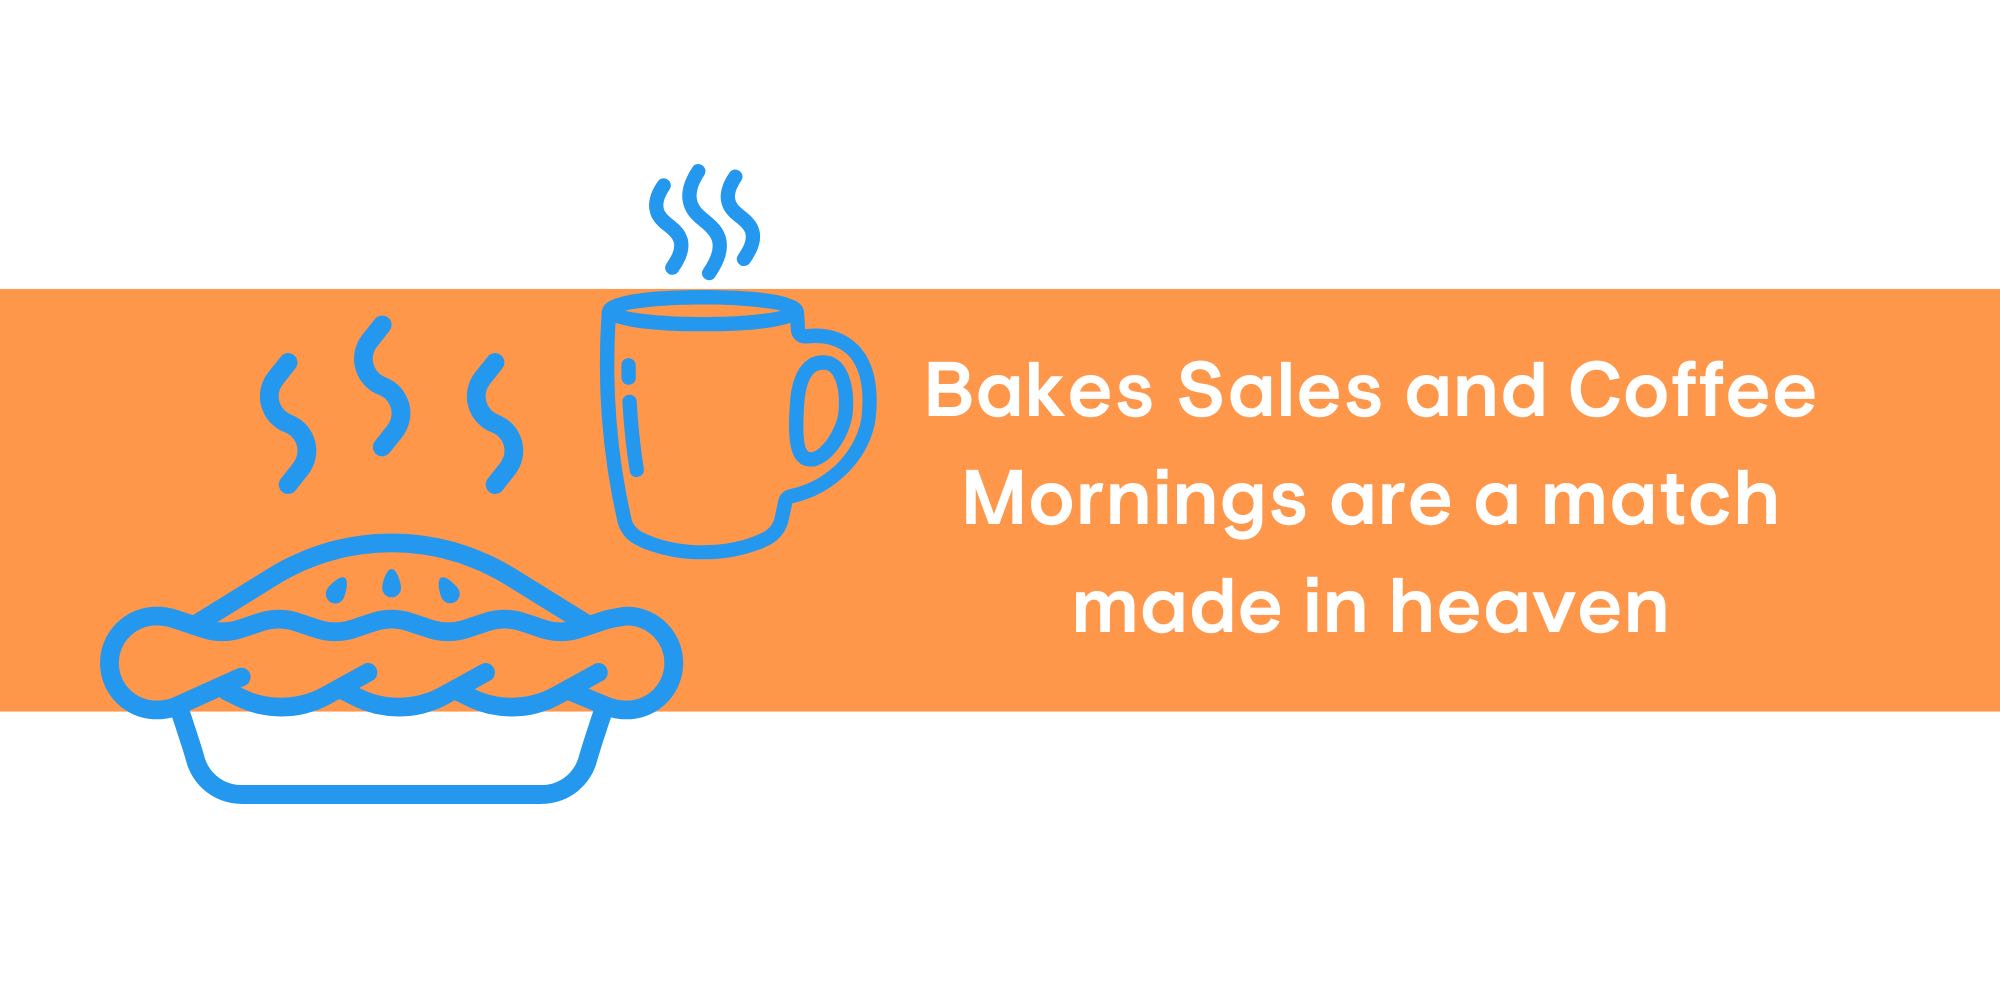 Do a bake sale and coffee morning to maximize your church camp fundraiser potential